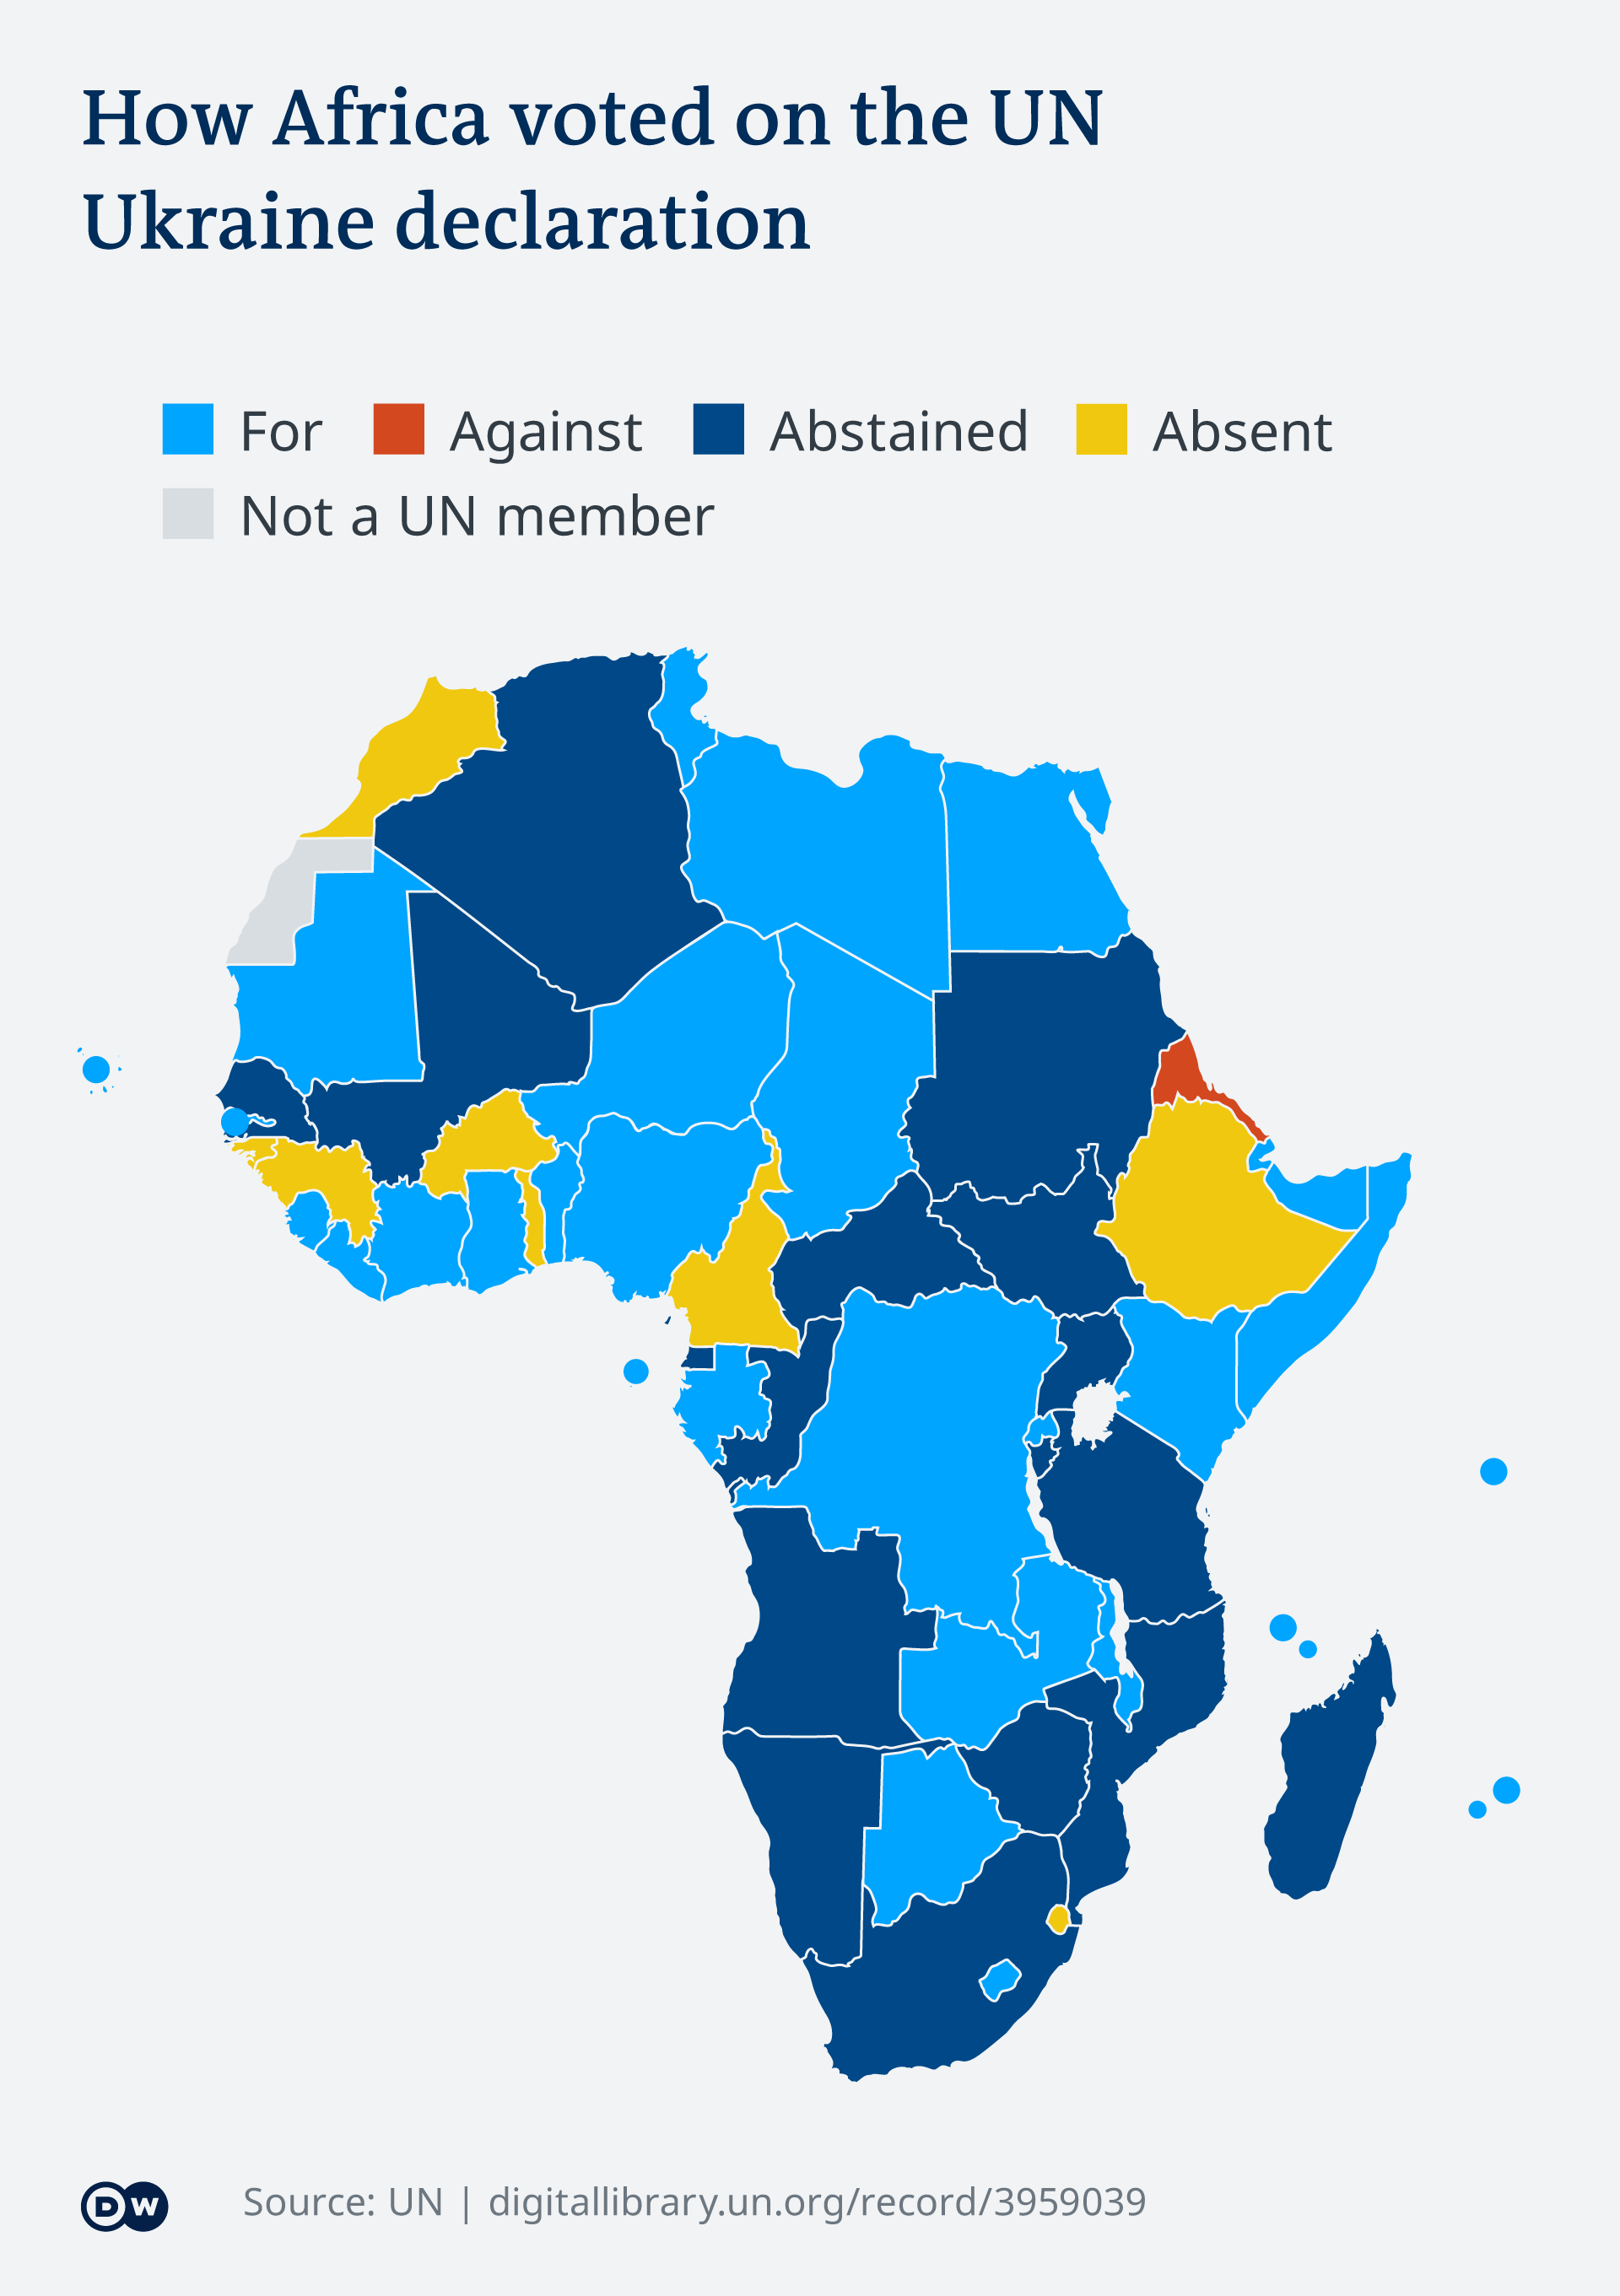 Infographic showing how Africa voted on the UN Ukraine declaration